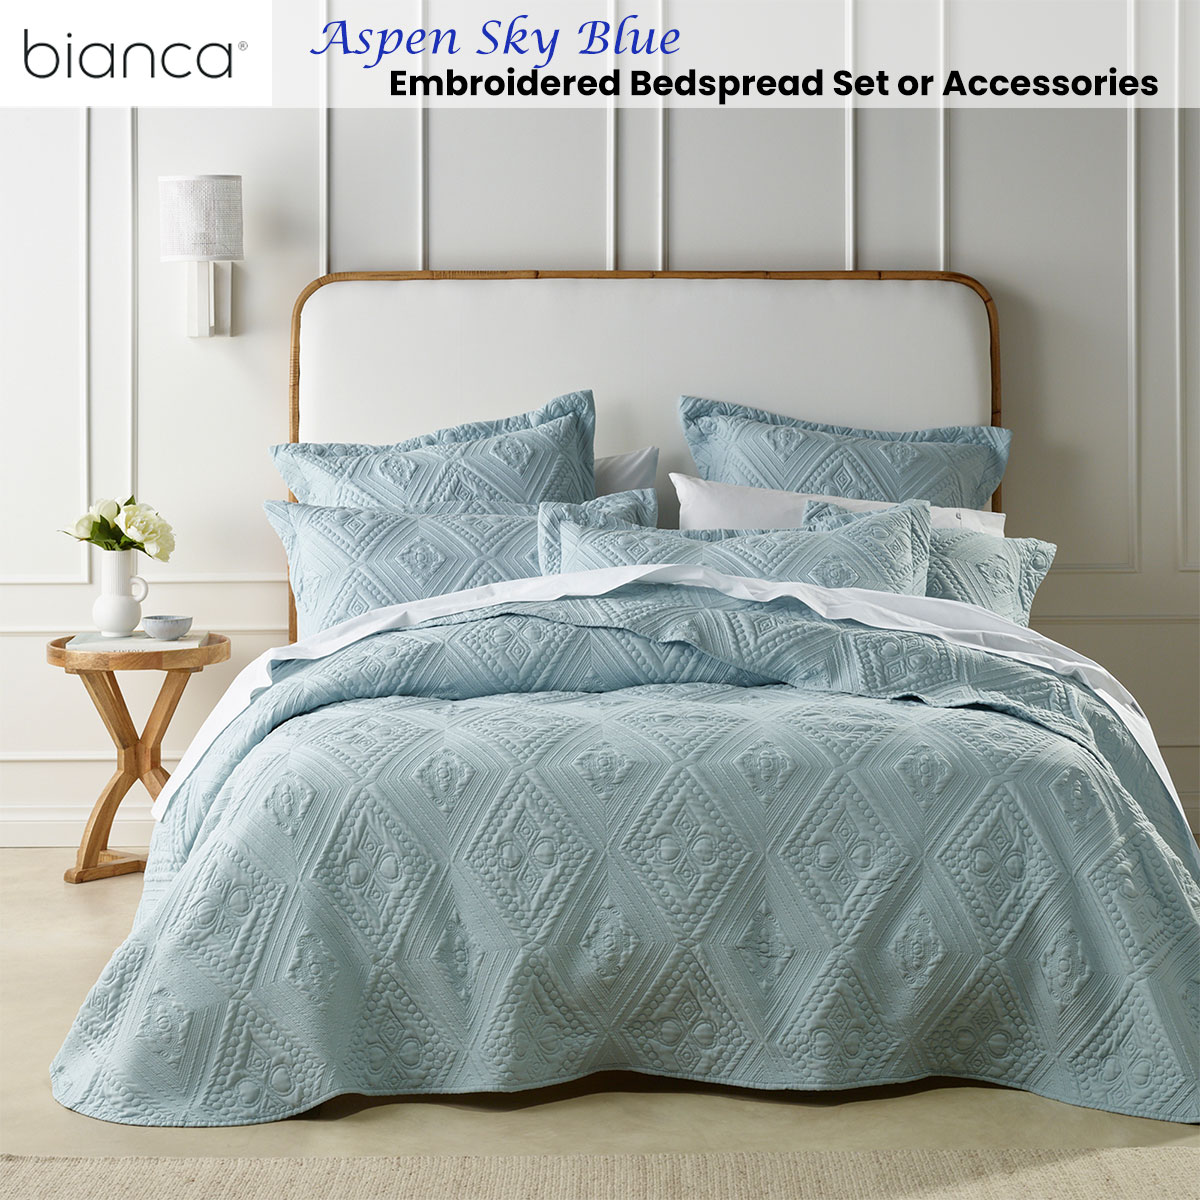 Aspen Sky Blue Embroidered Bedspread Set or Accessories by Bianca